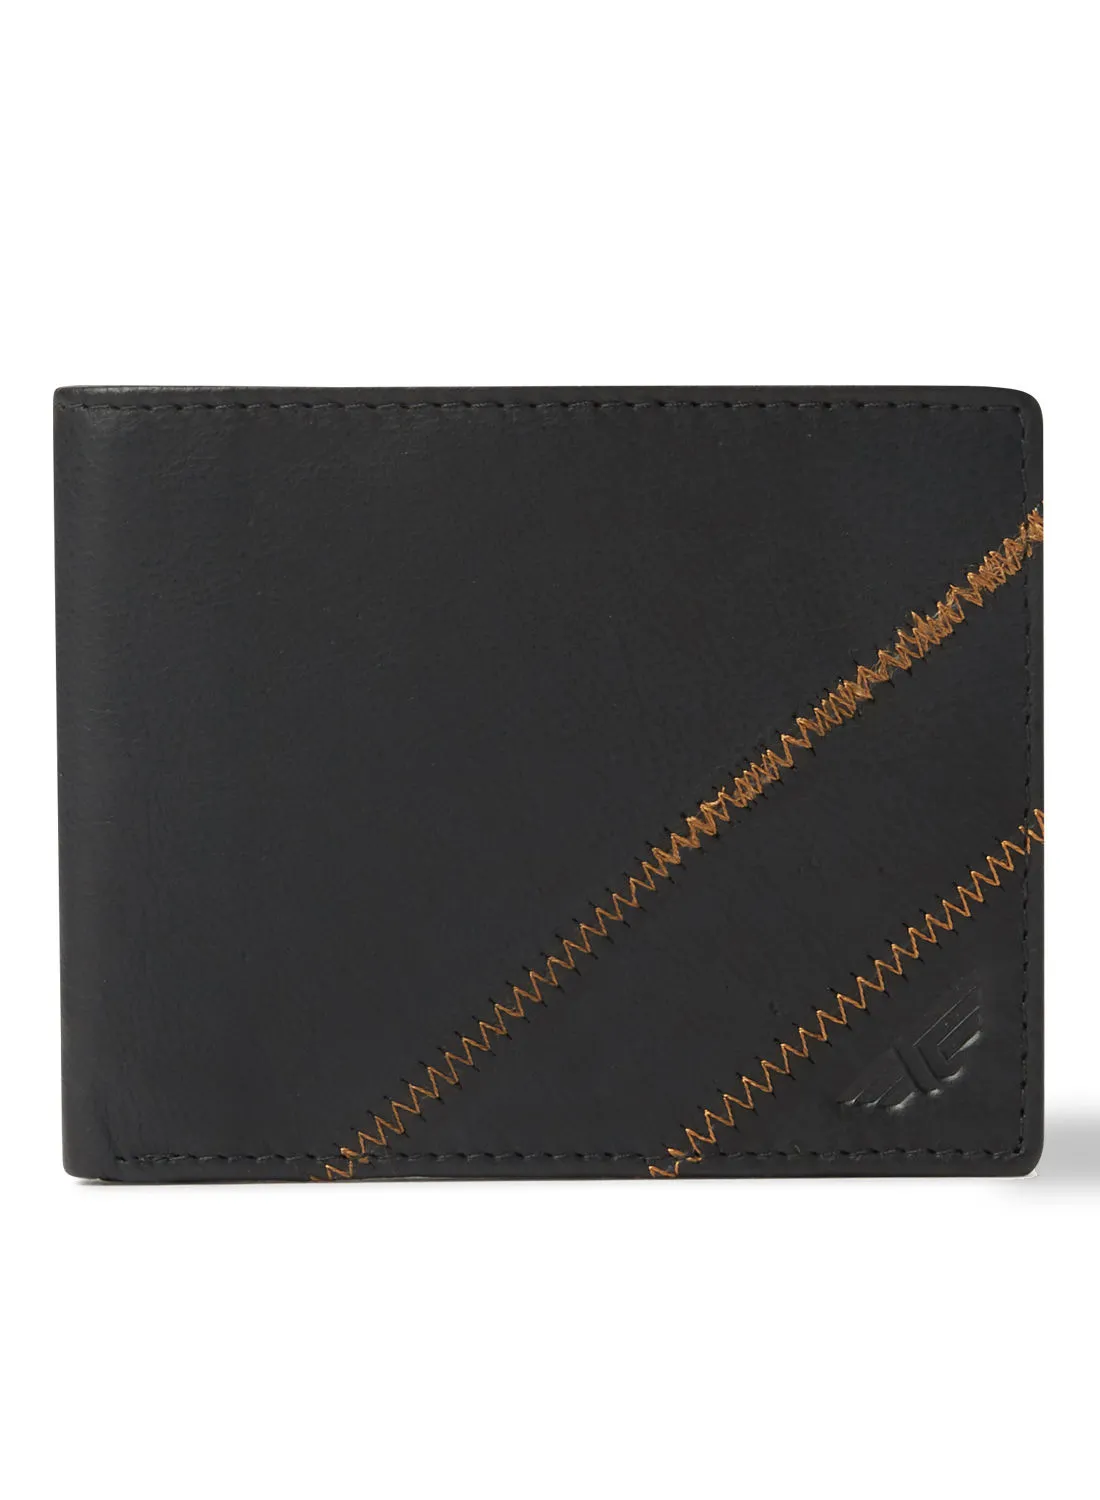 Red Tape Sewing Detailed Leather Wallet Black